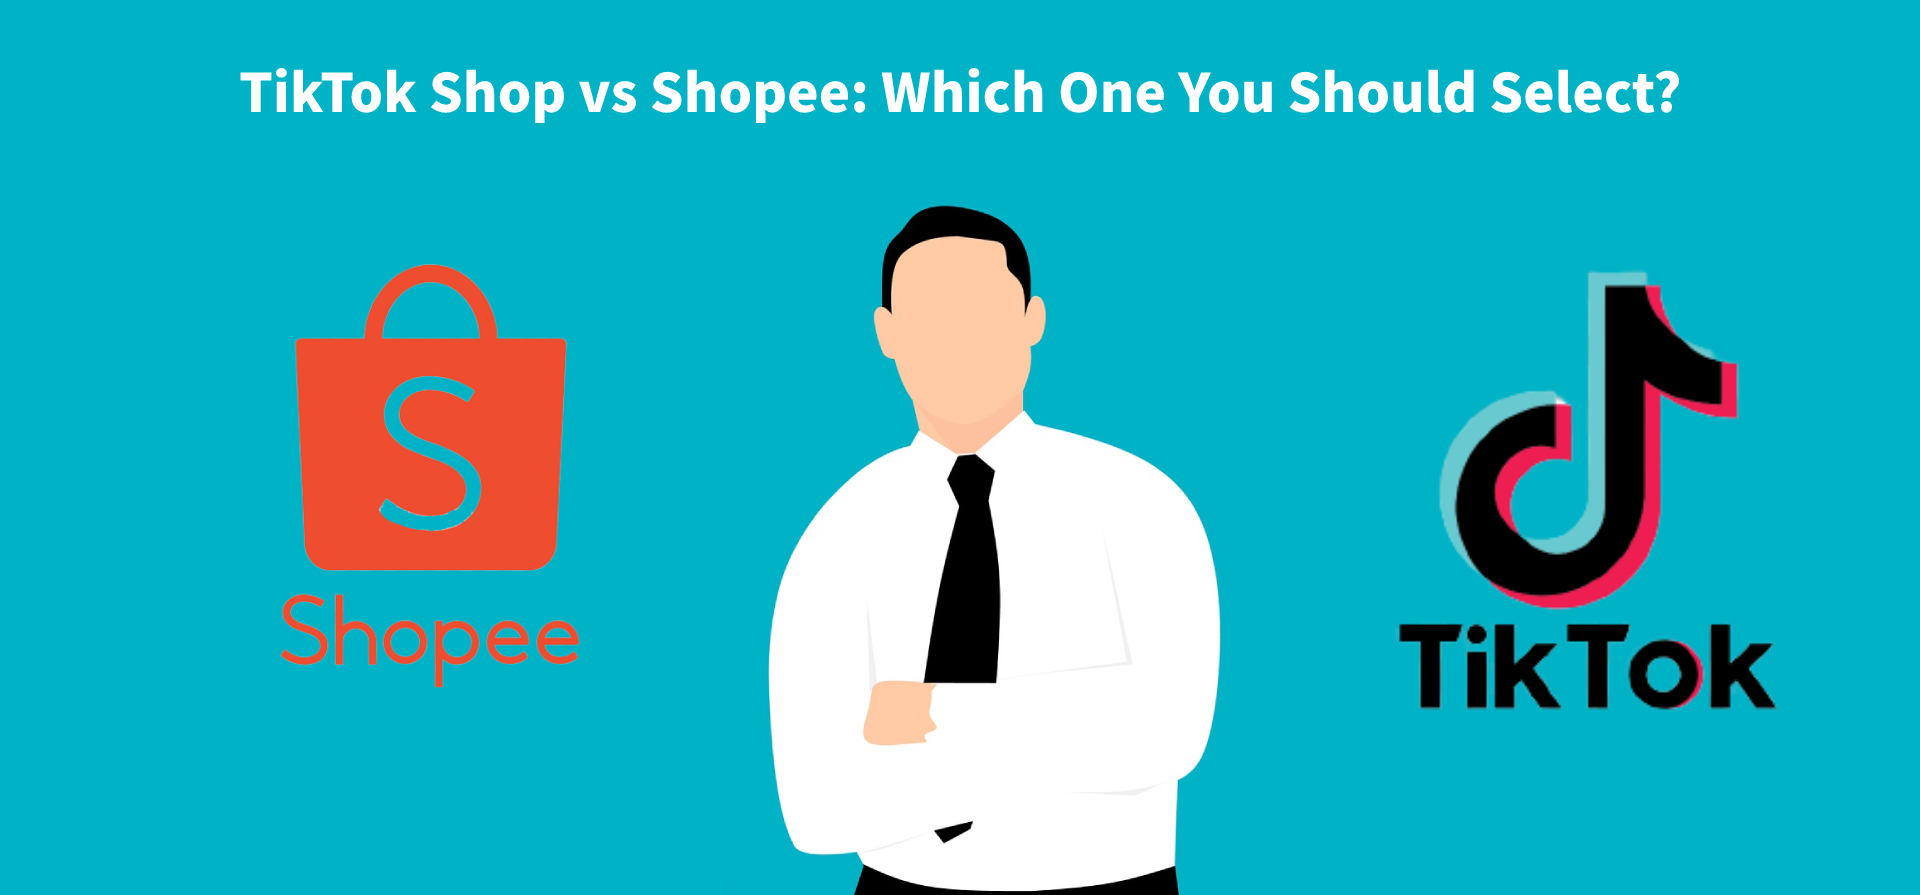 TikTok Shop vs Shopee: Which One You Should Select?